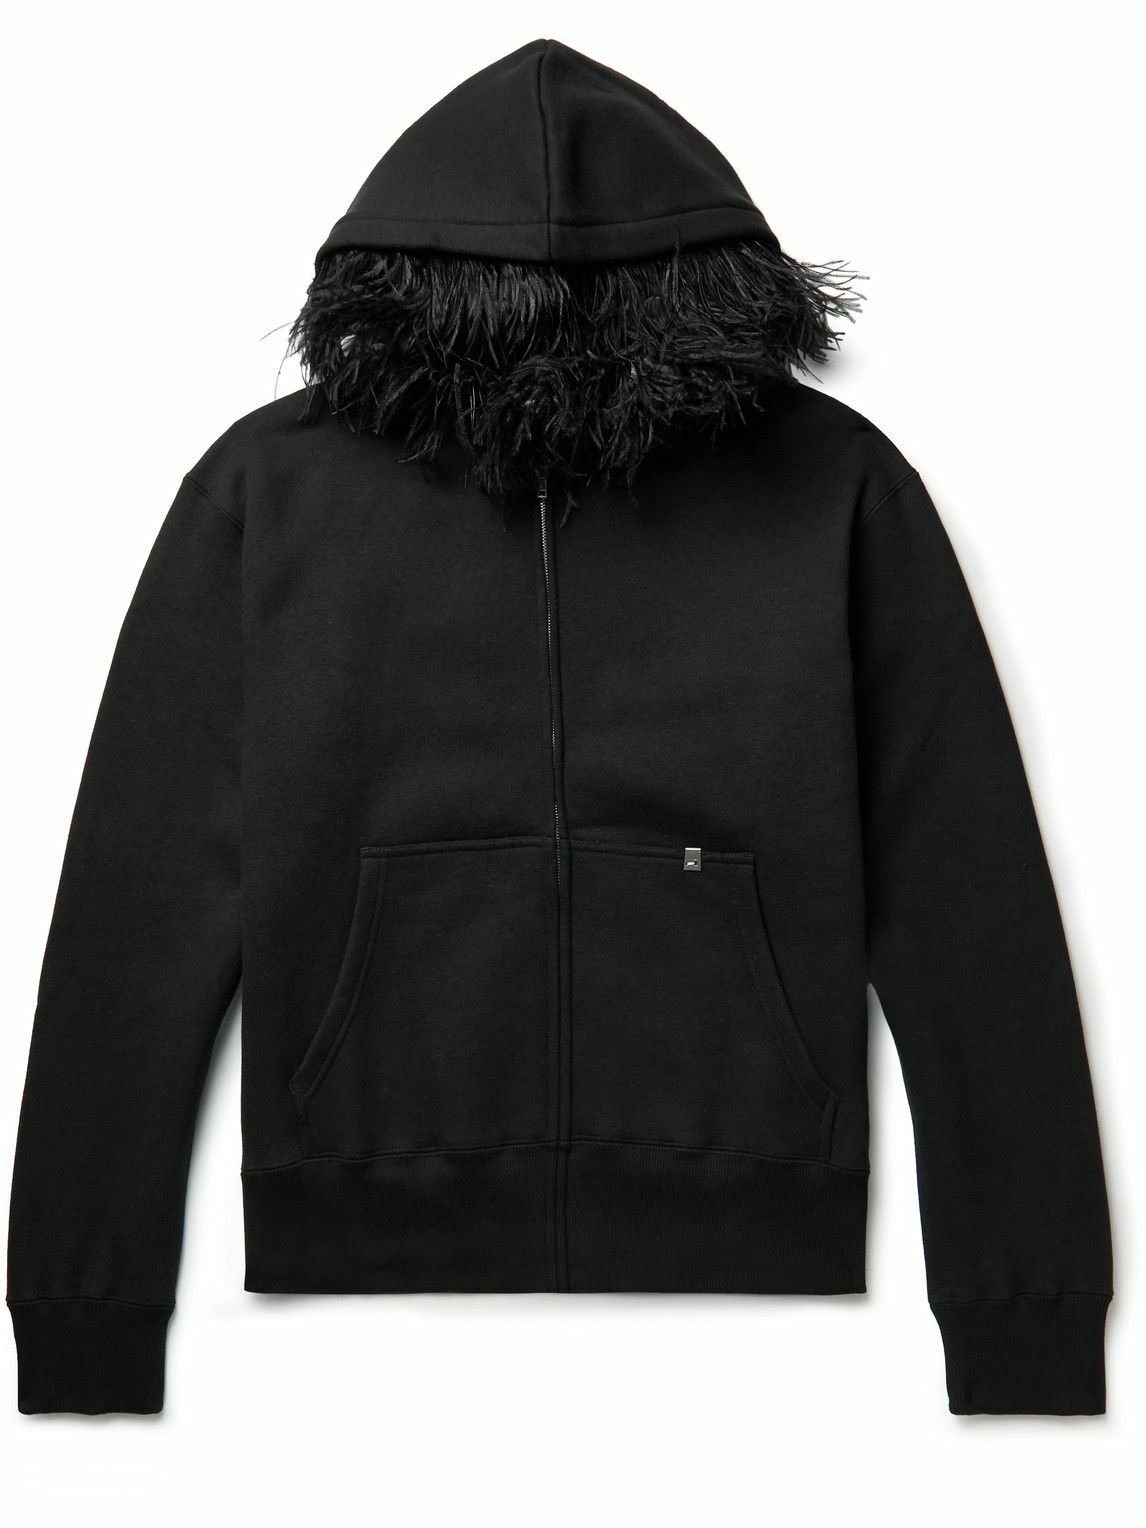 Photo: 1017 ALYX 9SM - Feather-Trimmed Cotton-Jersey Zip-Up Hoodie - Black